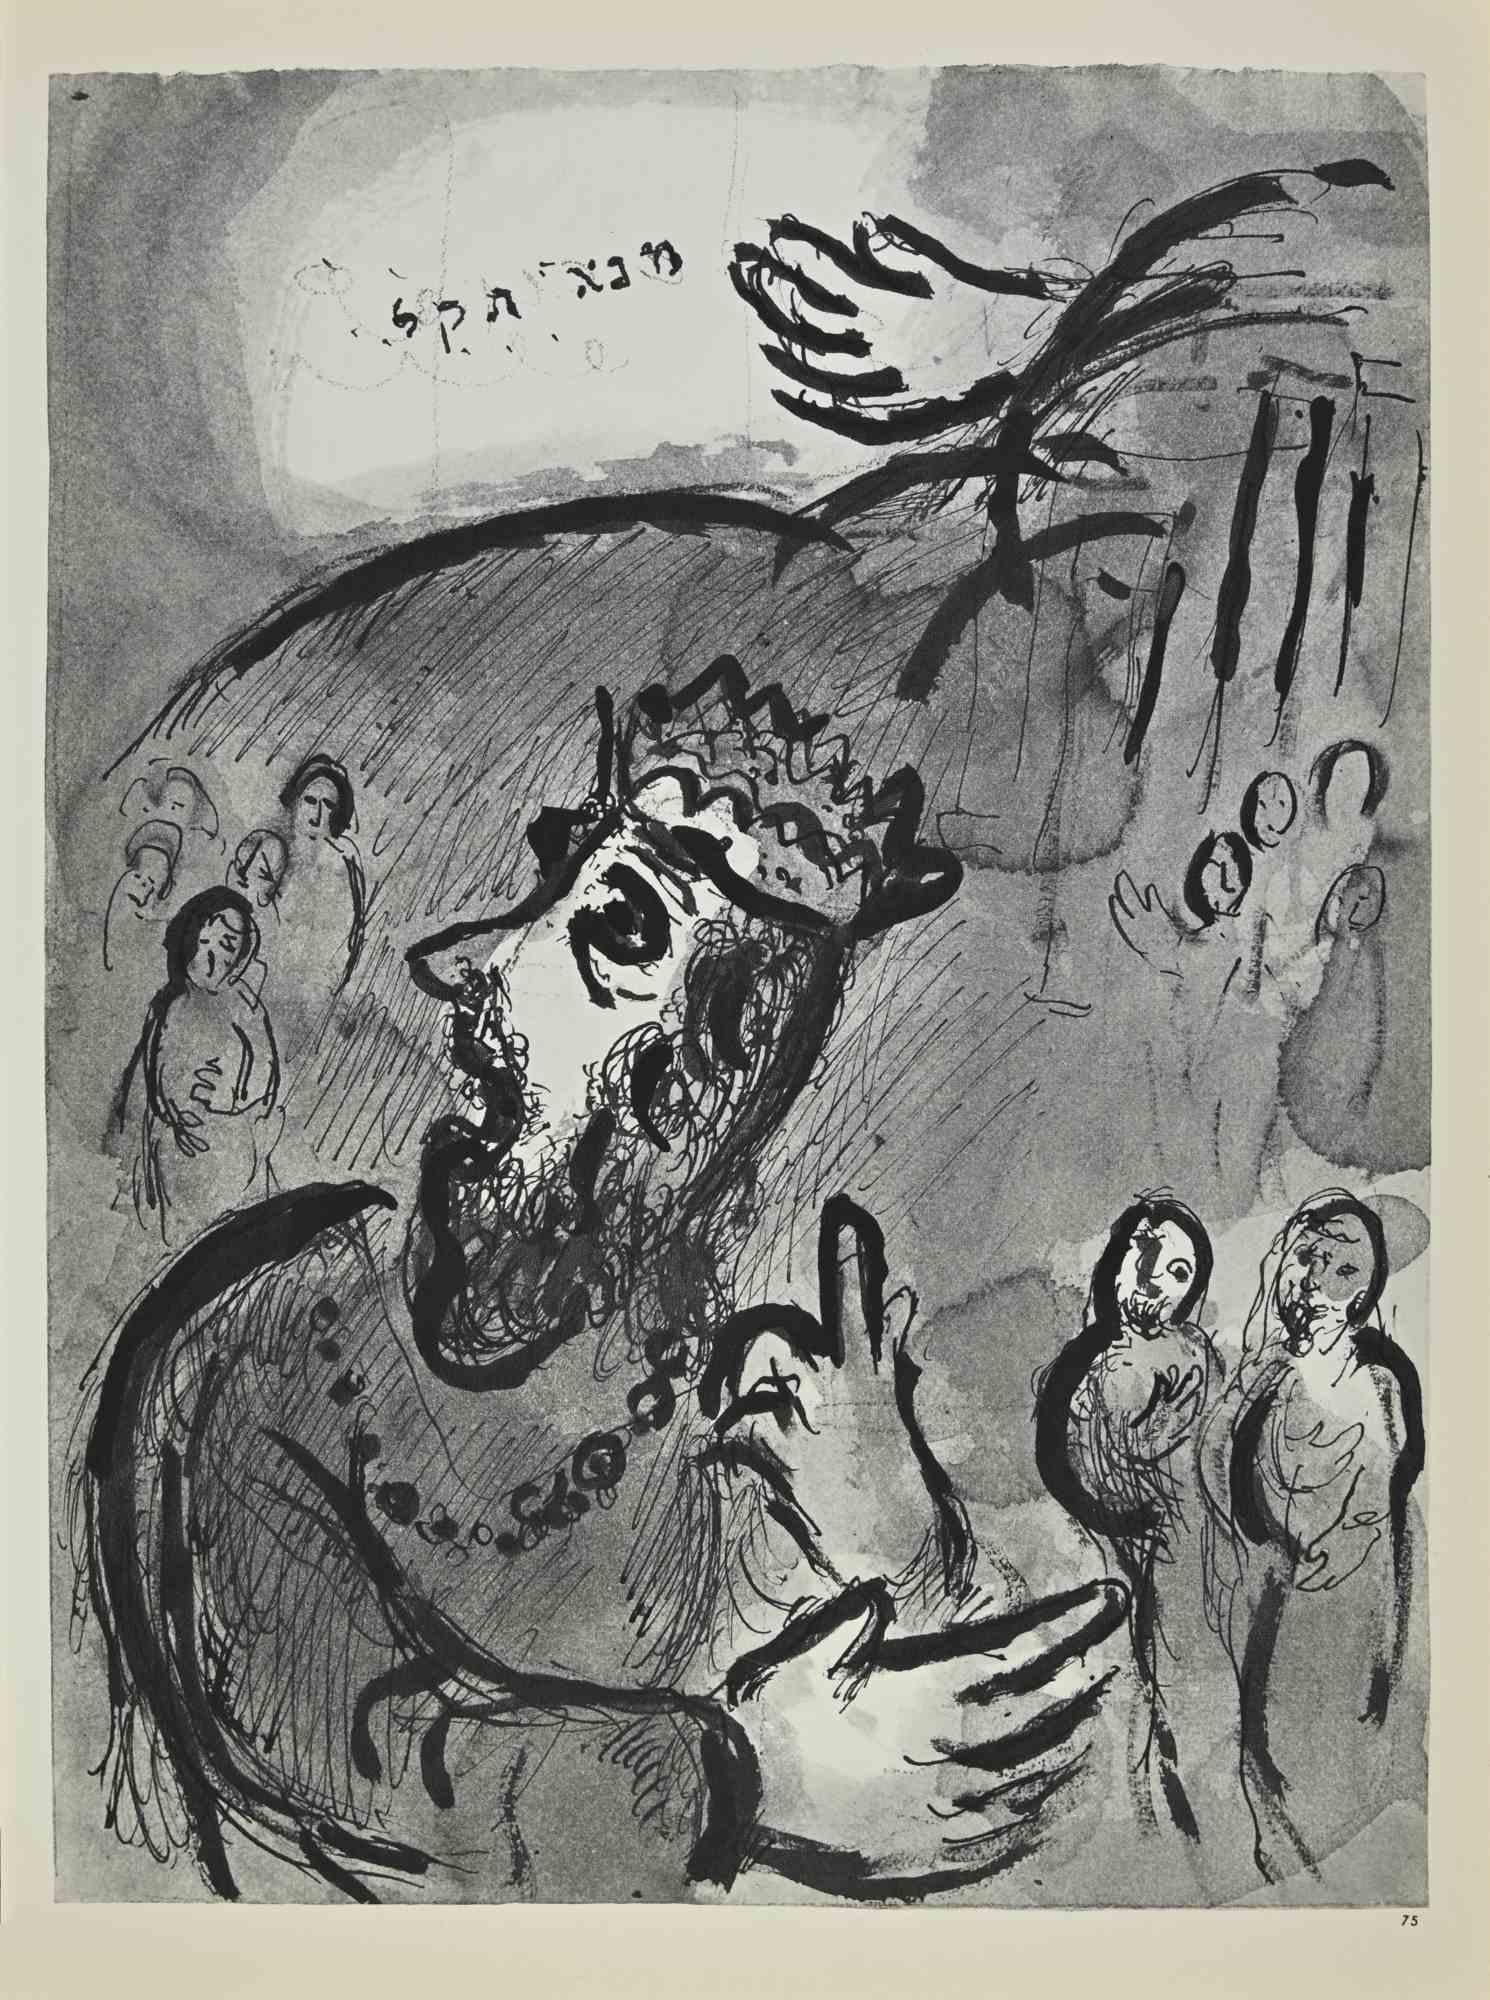 Daniel's Second Vision is an artwork realized by Marc Chagall, 1960s.

Lithograph on brown-toned paper, no signature.

Lithograph on both sheets.

Edition of 6500 unsigned lithographs. Printed by Mourlot and published by Tériade, Paris.

Ref.